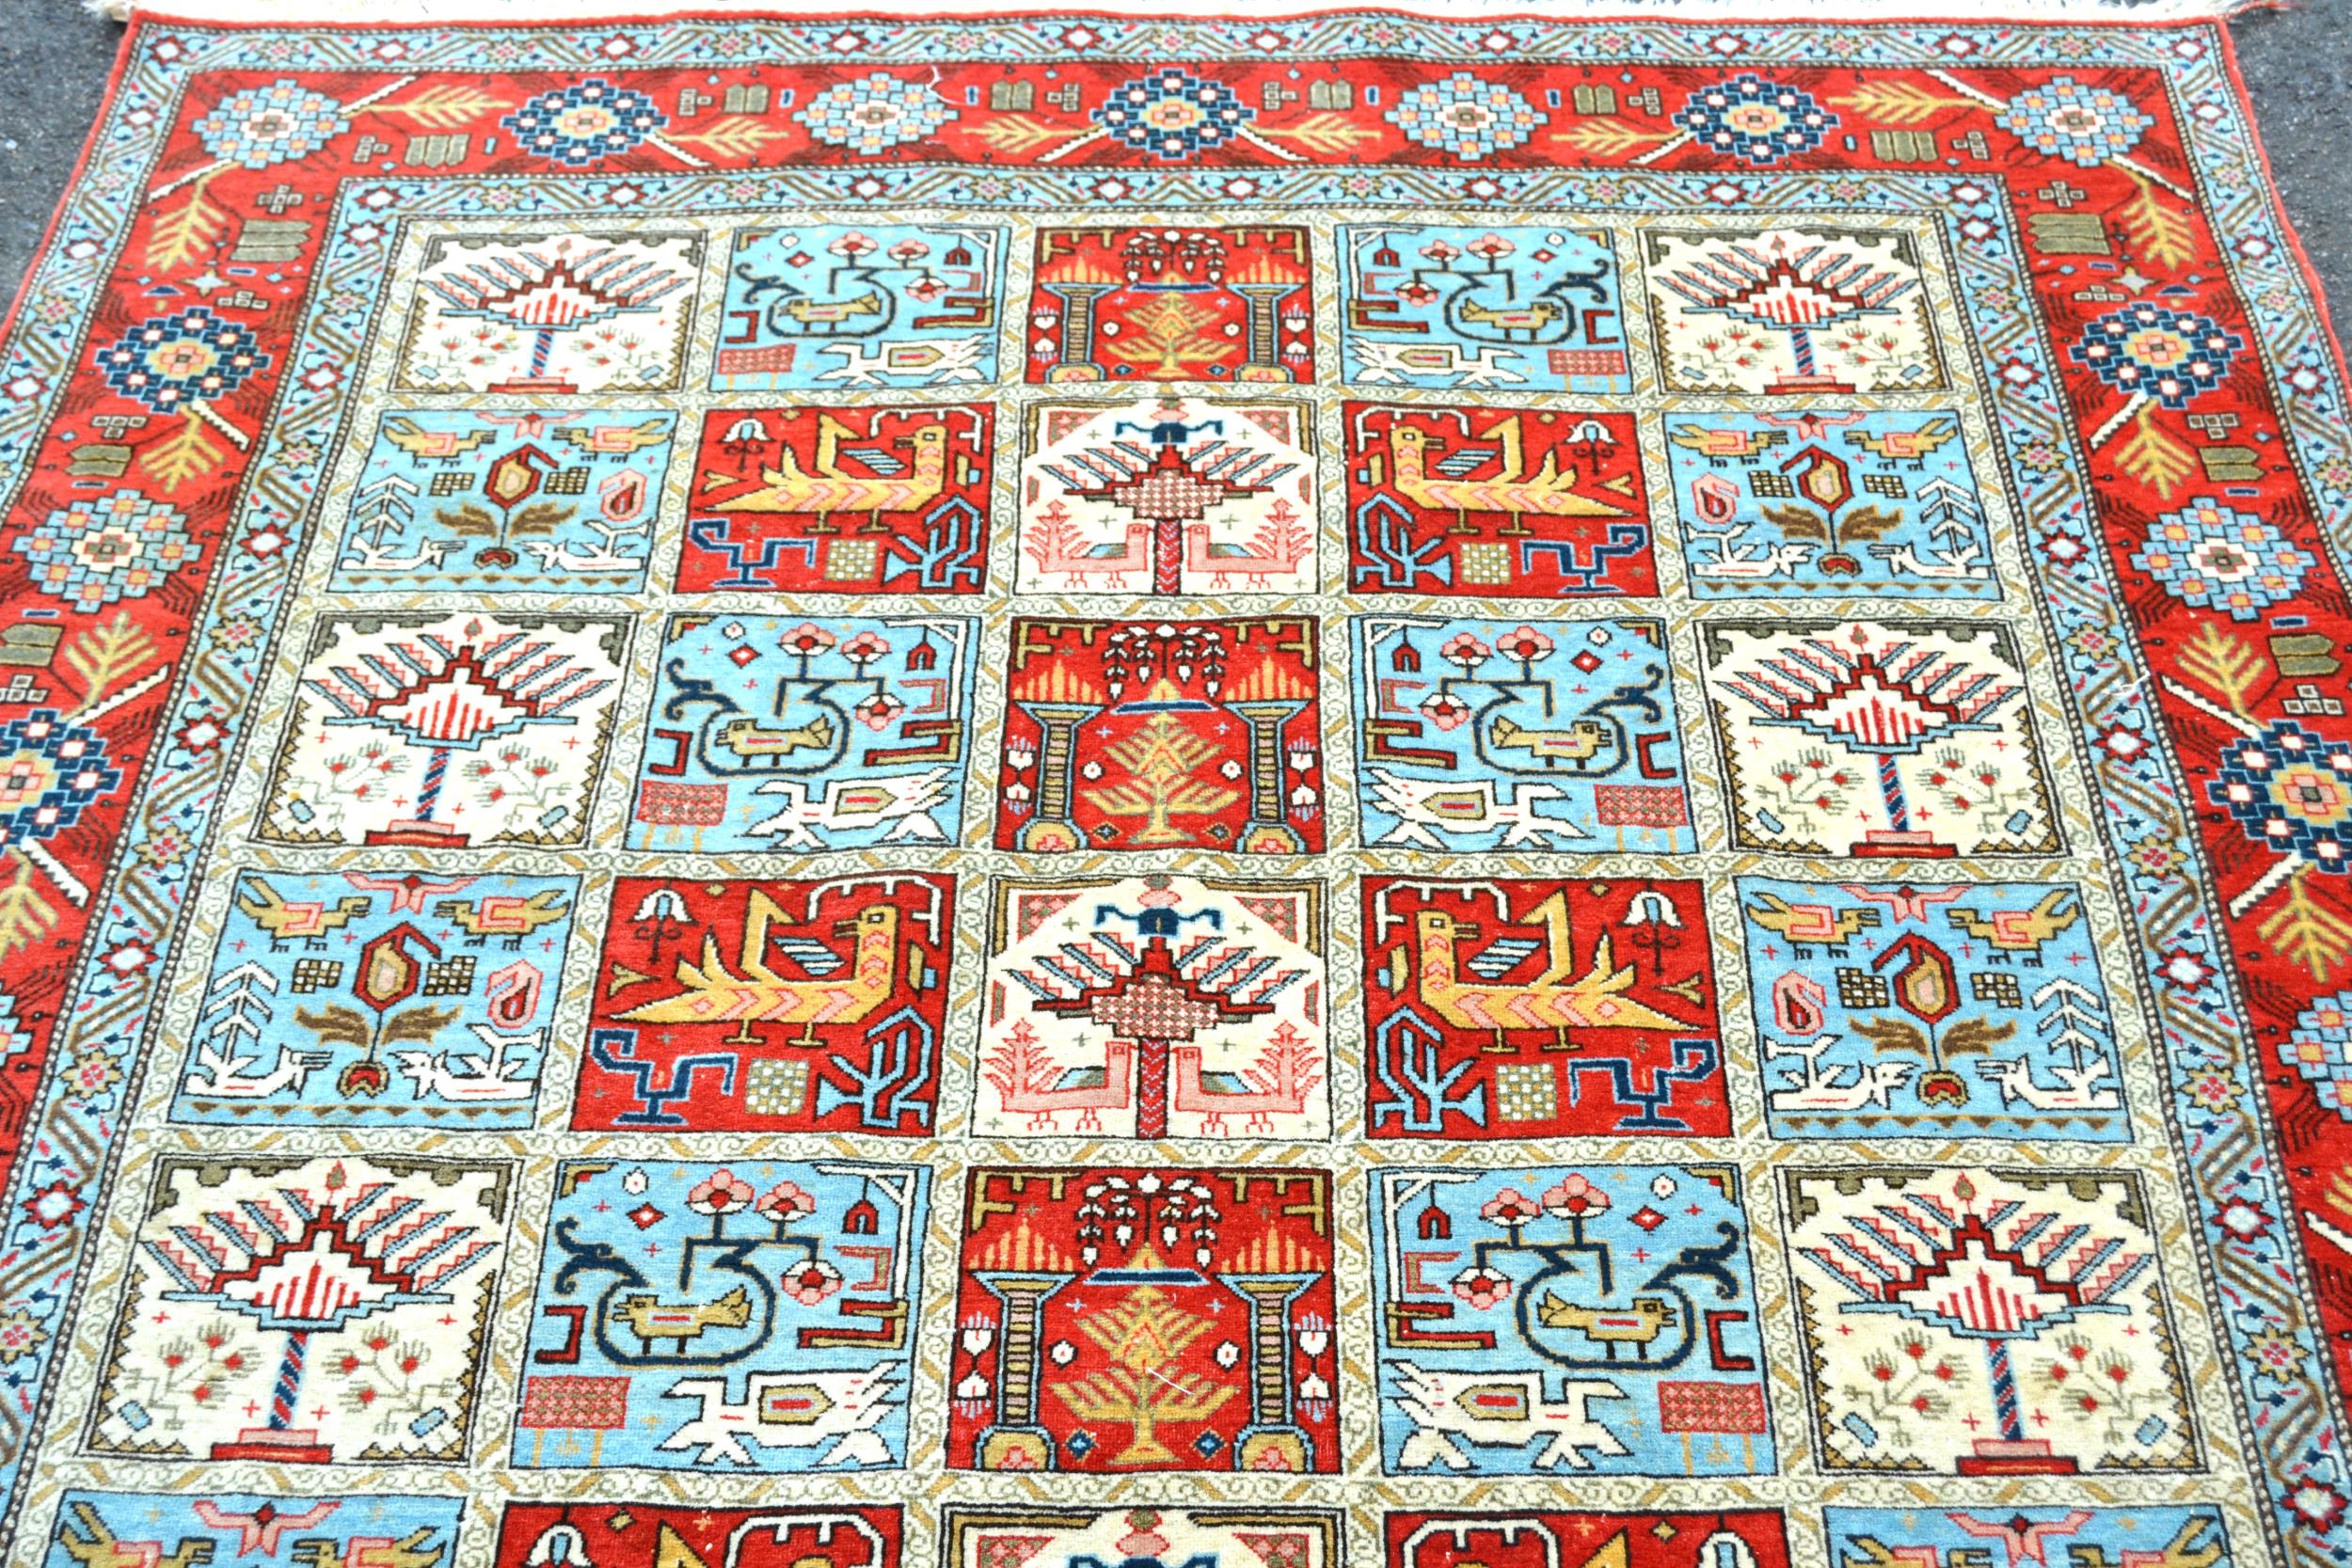 Tabriz all-over tile pattern rug in shades of brick red, pale blue and cream, 205 x 135cm - Image 3 of 4